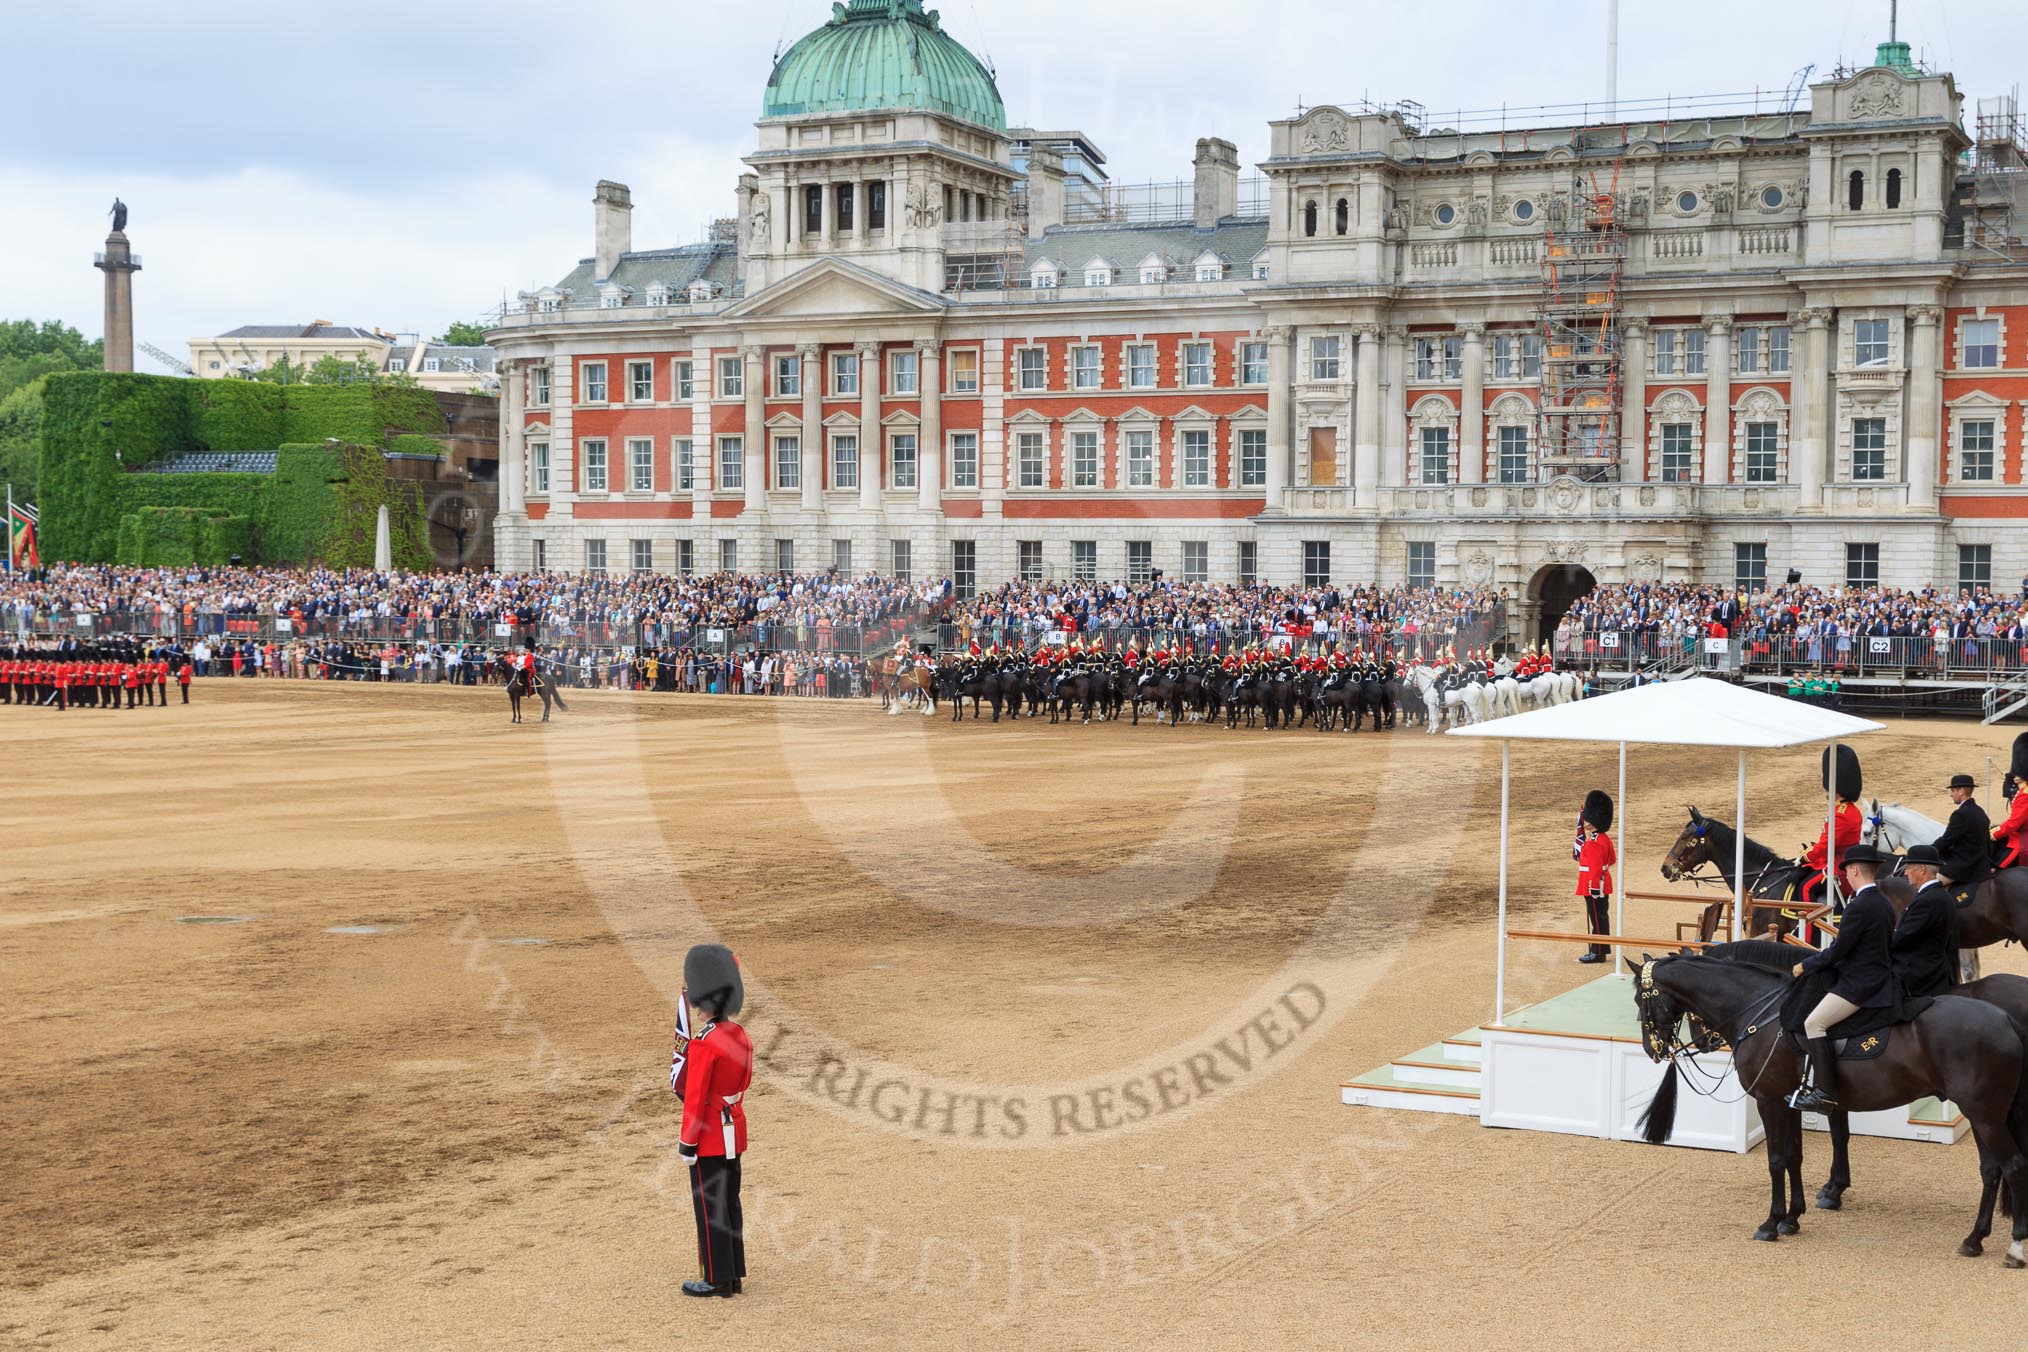 during The Colonel's Review {iptcyear4} (final rehearsal for Trooping the Colour, The Queen's Birthday Parade)  at Horse Guards Parade, Westminster, London, 2 June 2018, 12:06.